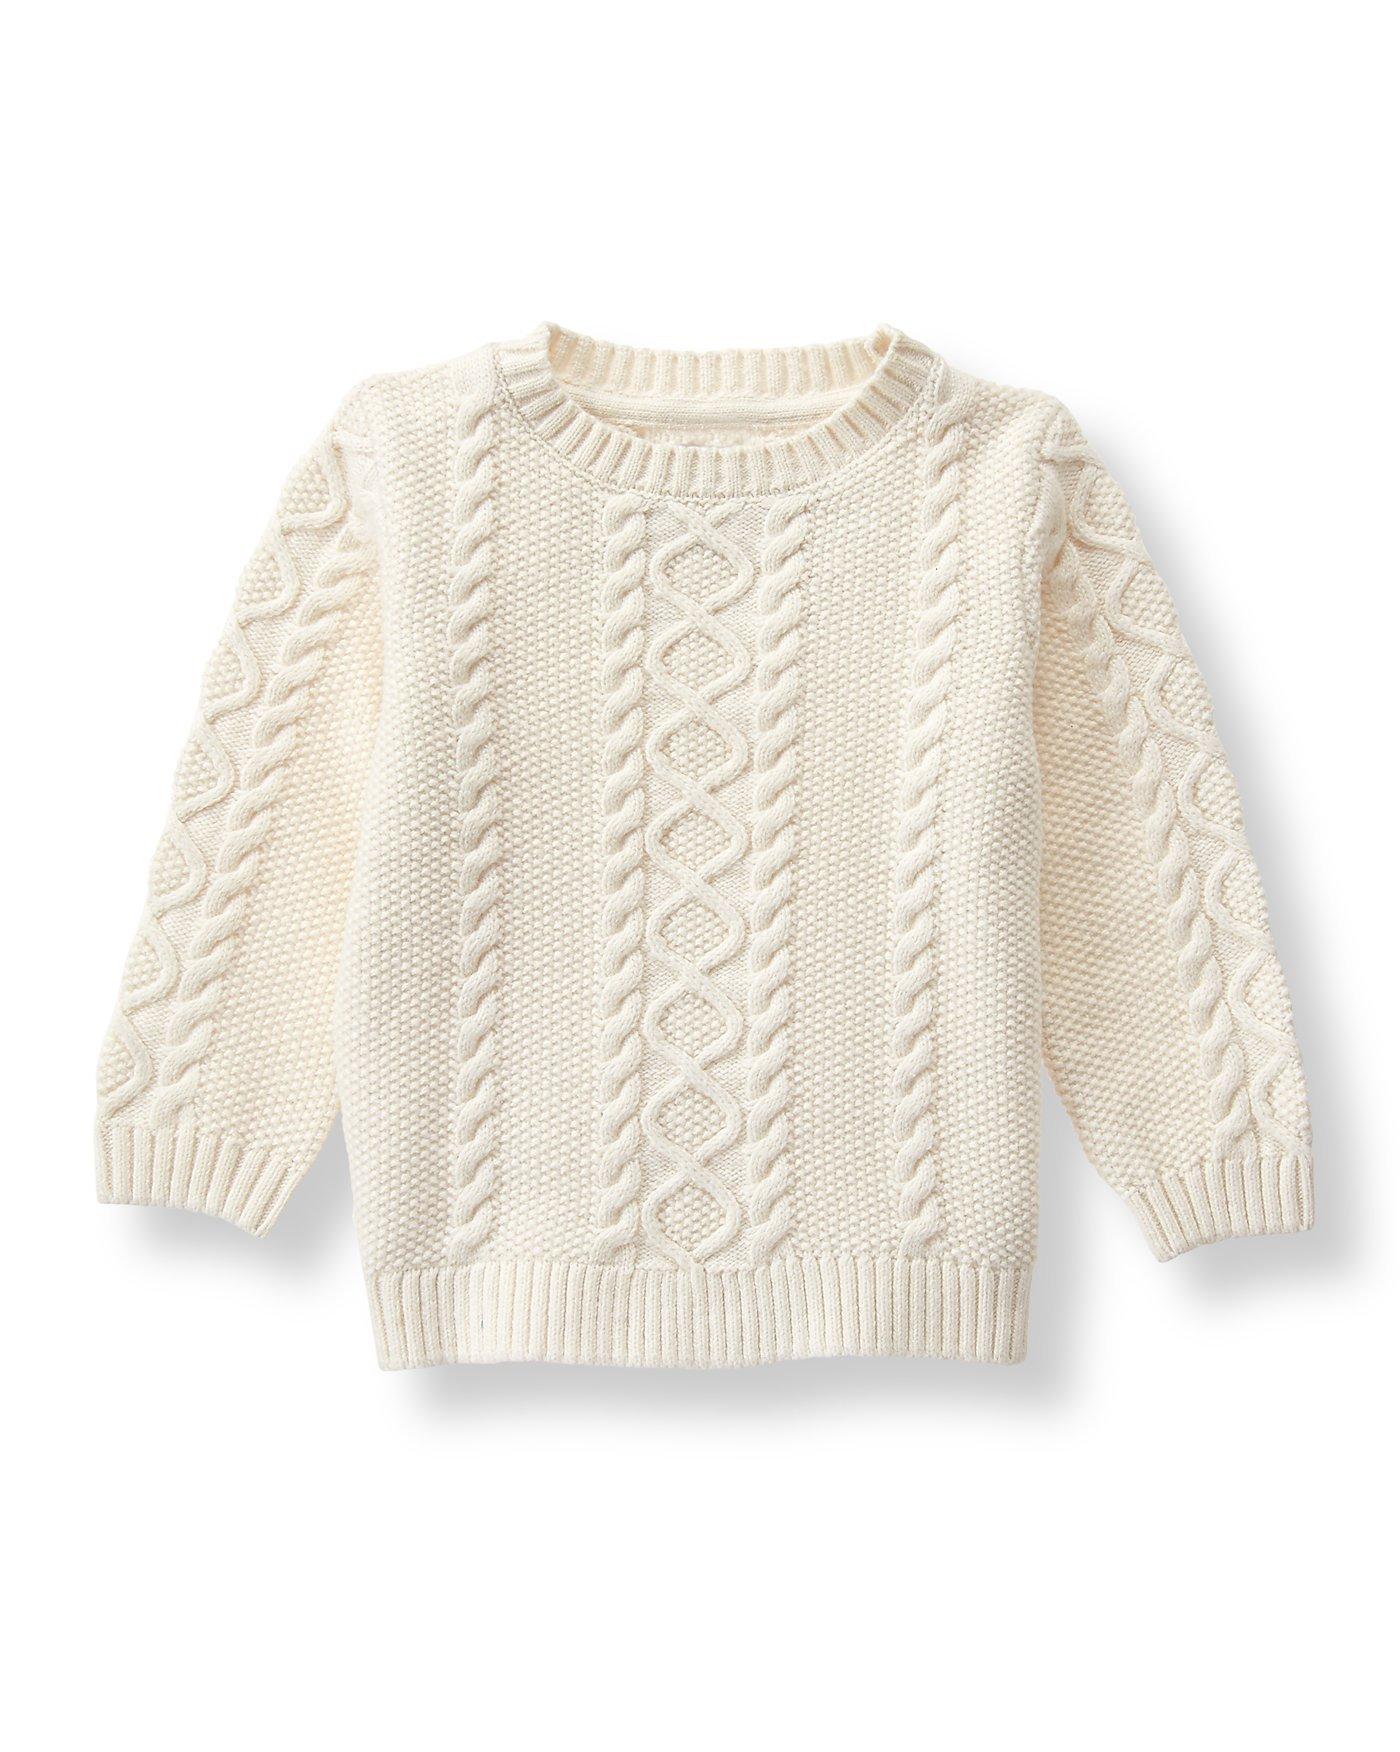 Boy Ivory Cable Sweater by Janie and Jack